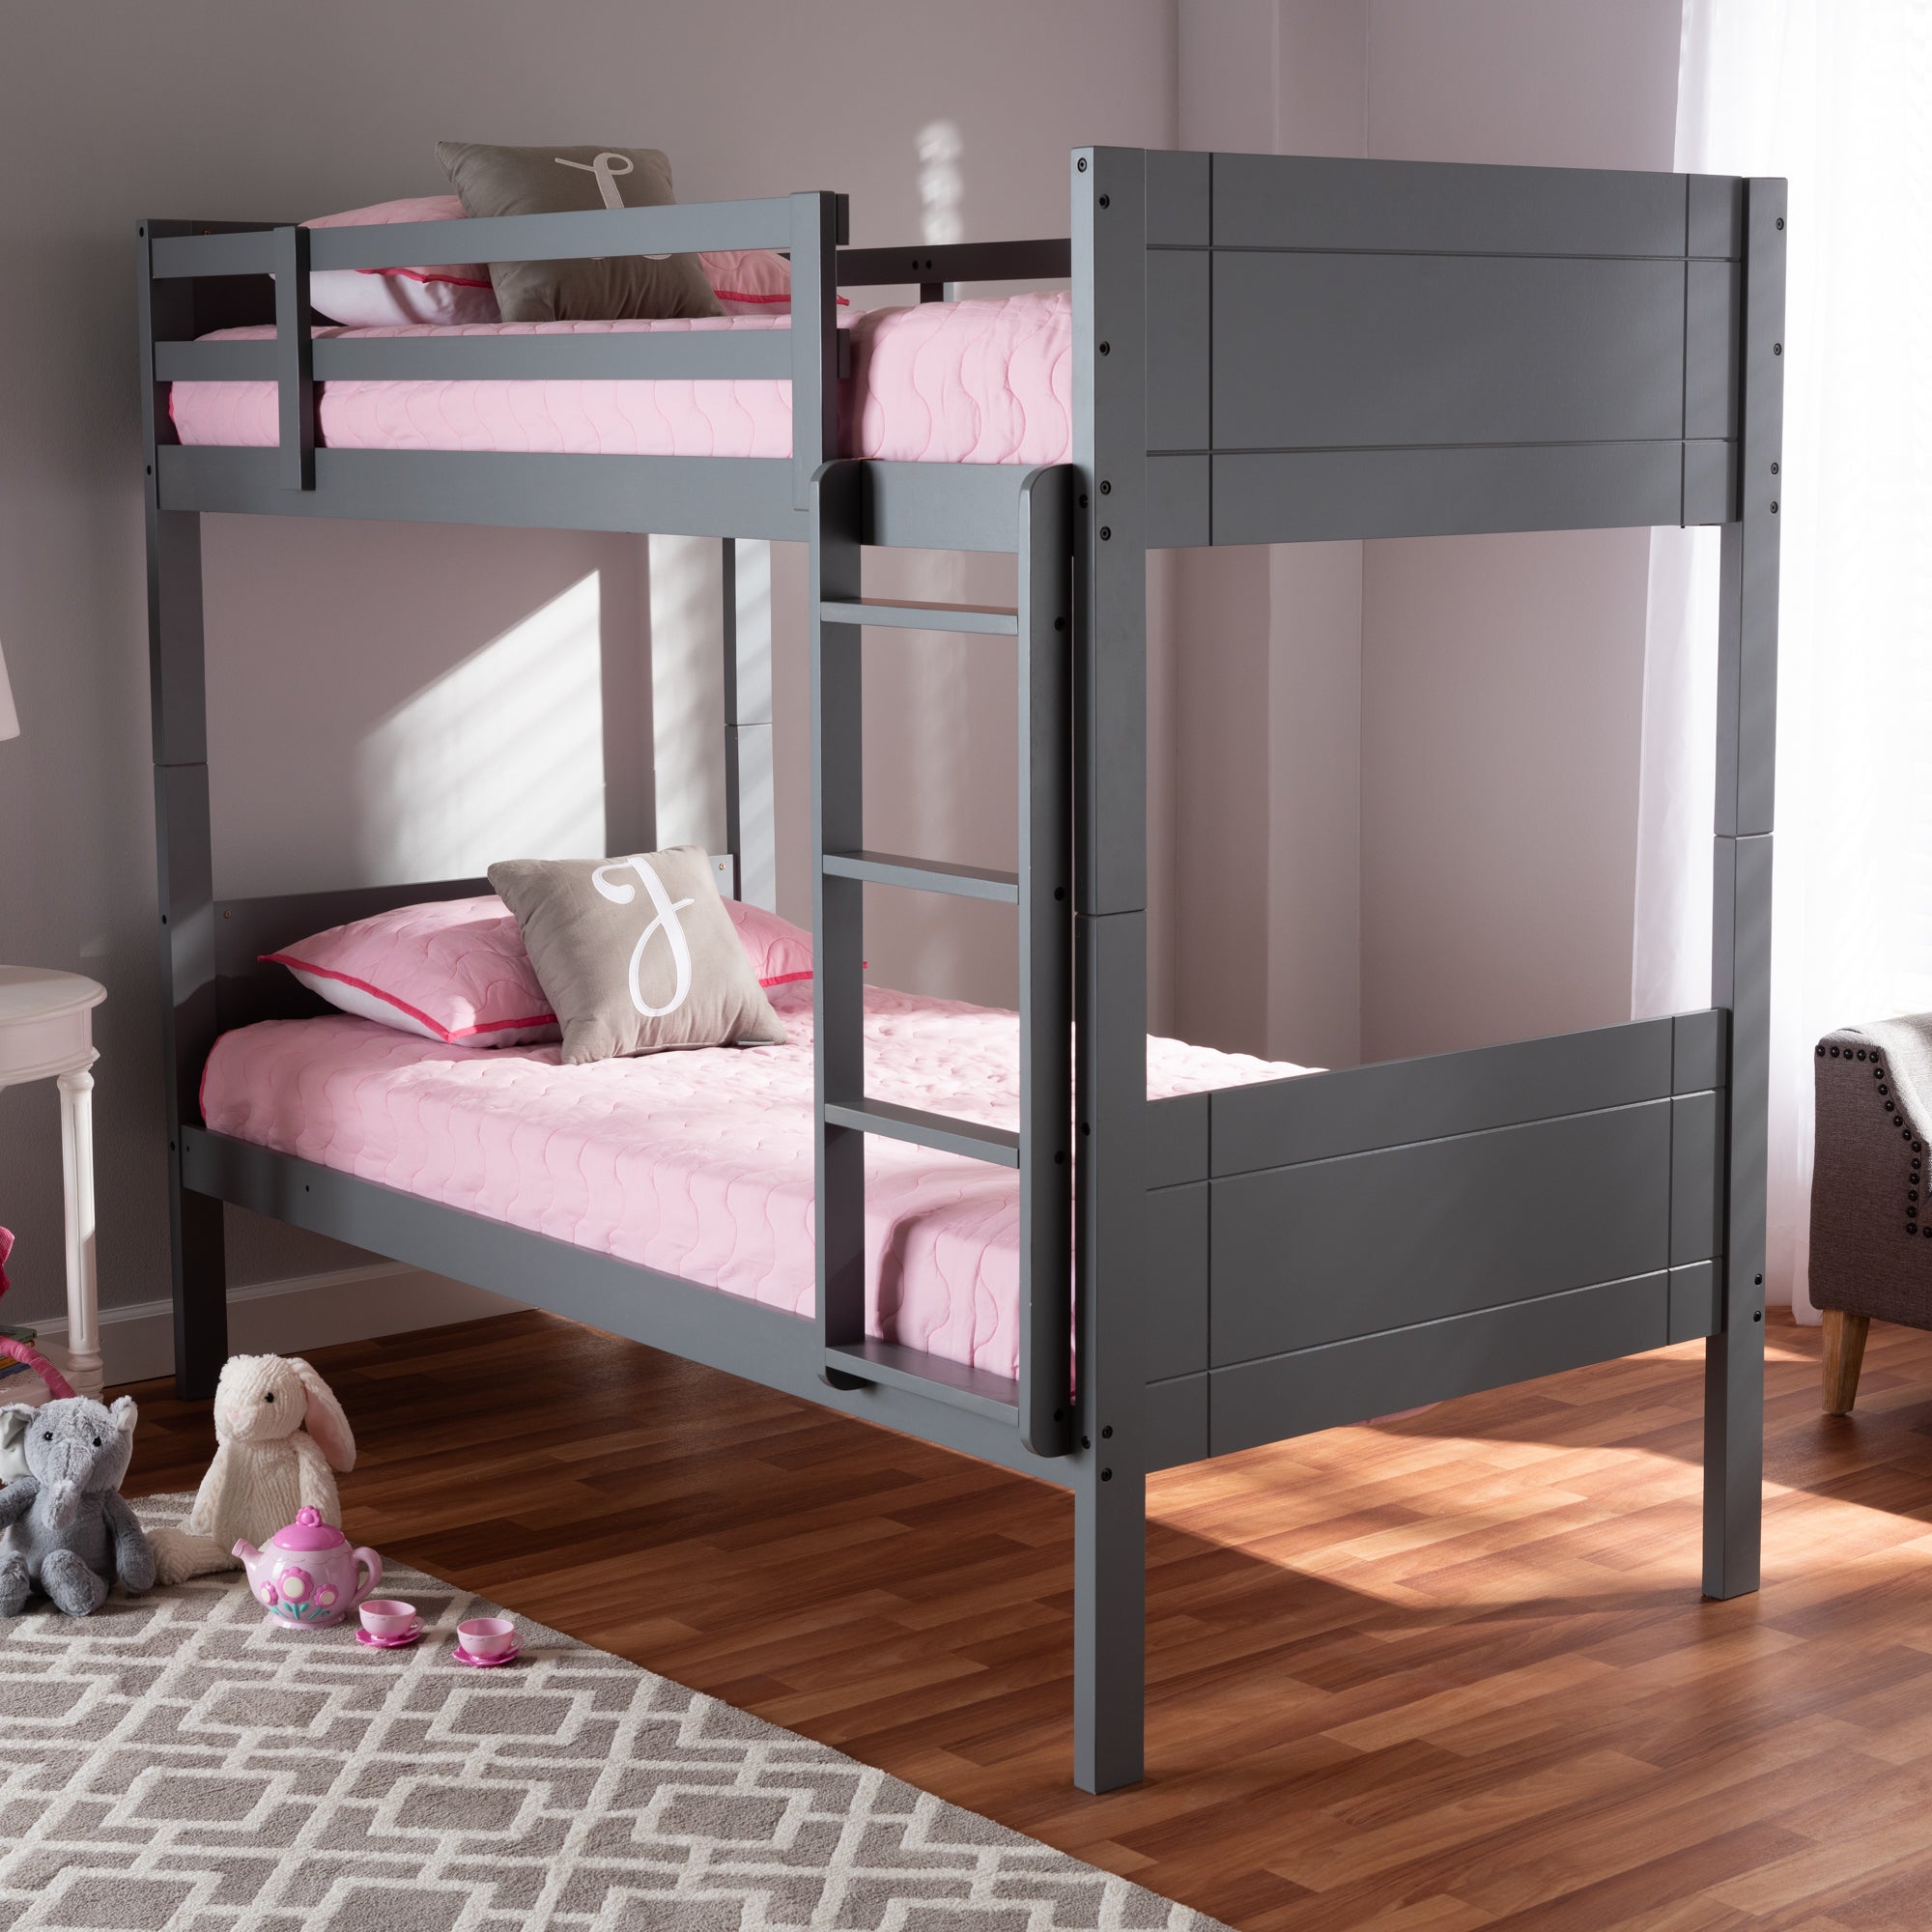 Elsie Contemporary Bunk Bed-Bunk Bed-Baxton Studio - WI-Wall2Wall Furnishings